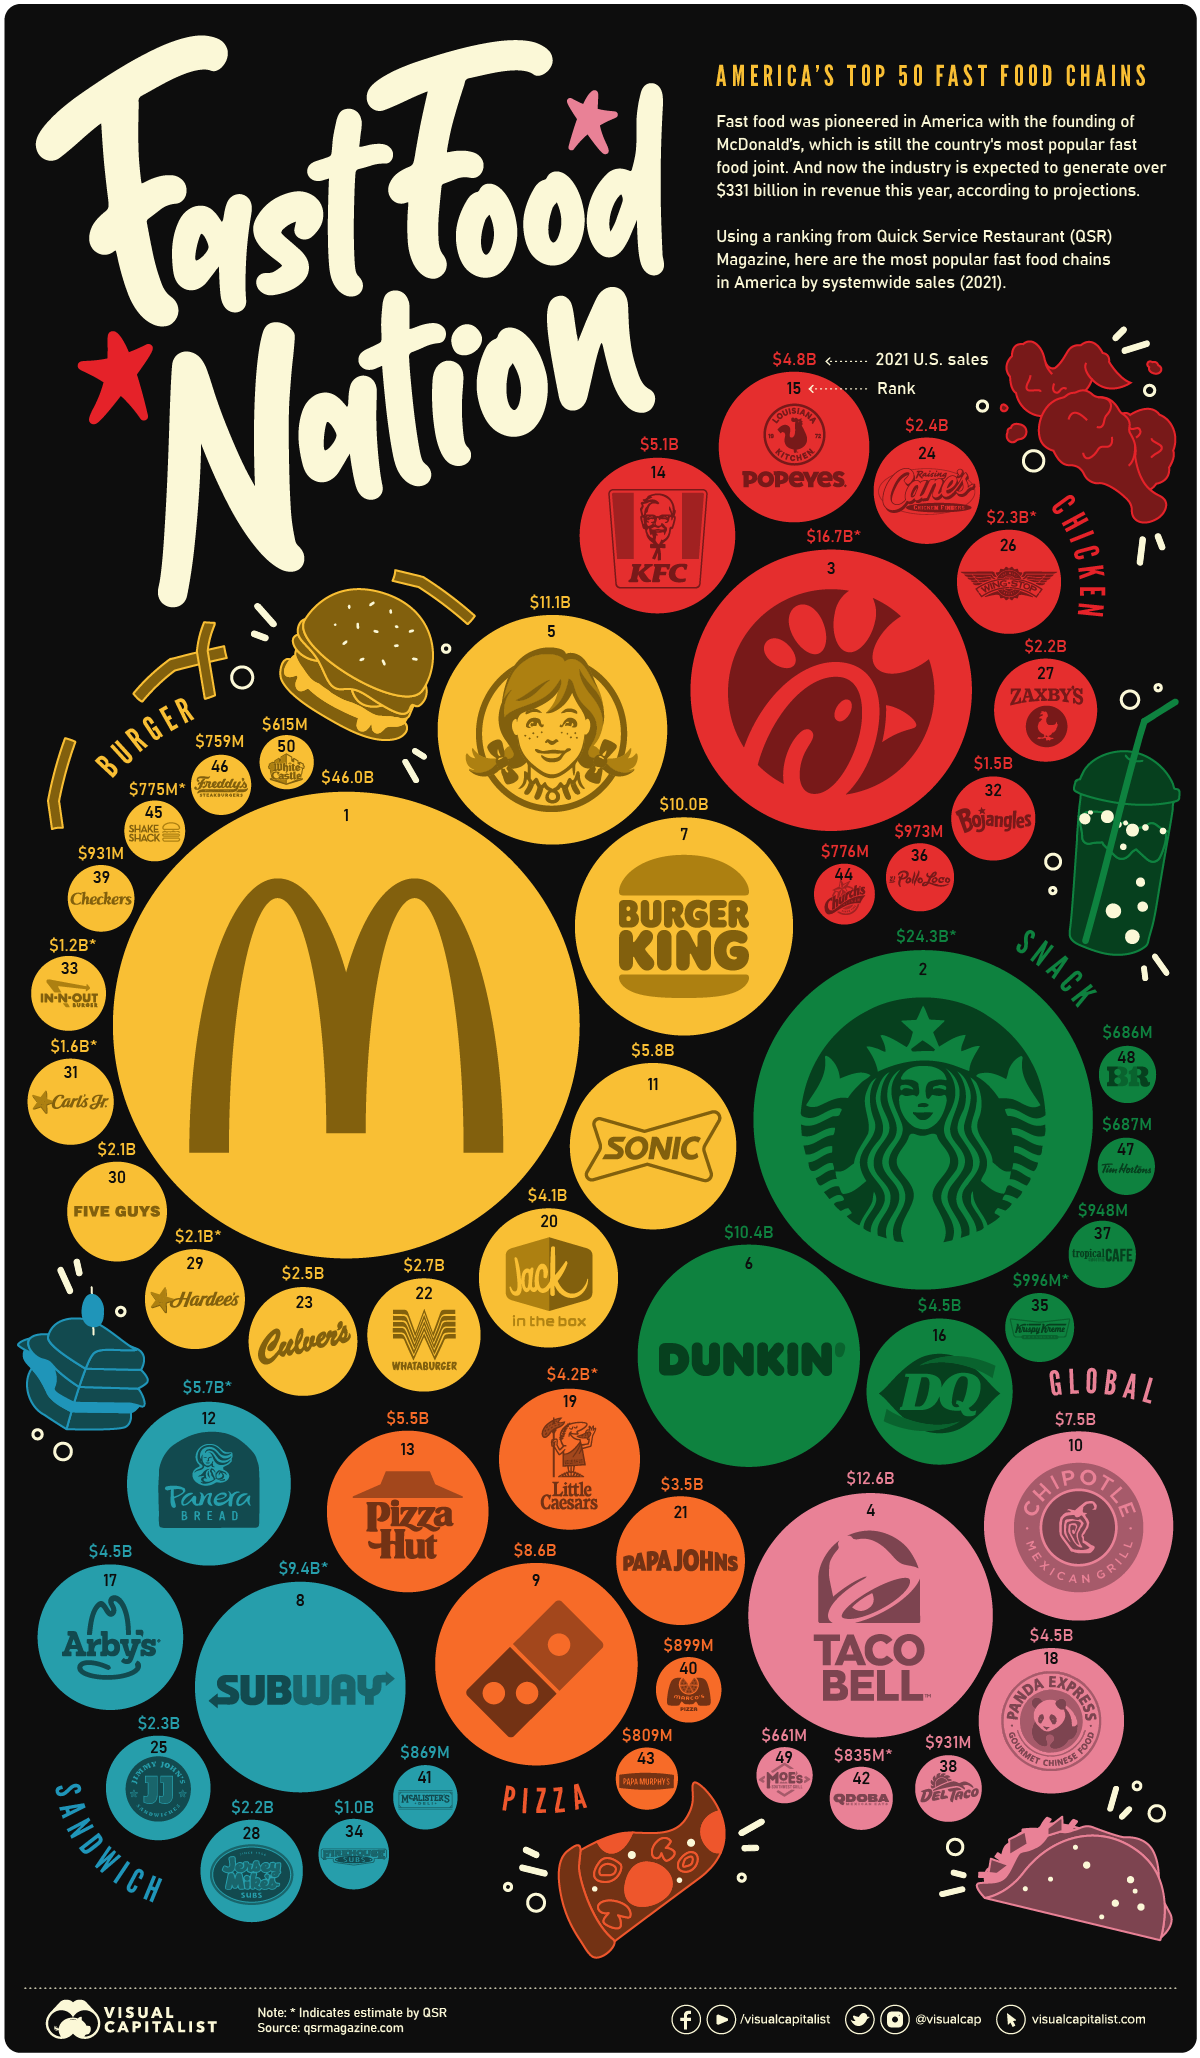 Ranked The Most Popular Fast Food Brands in America SEARCHNG SwordP...